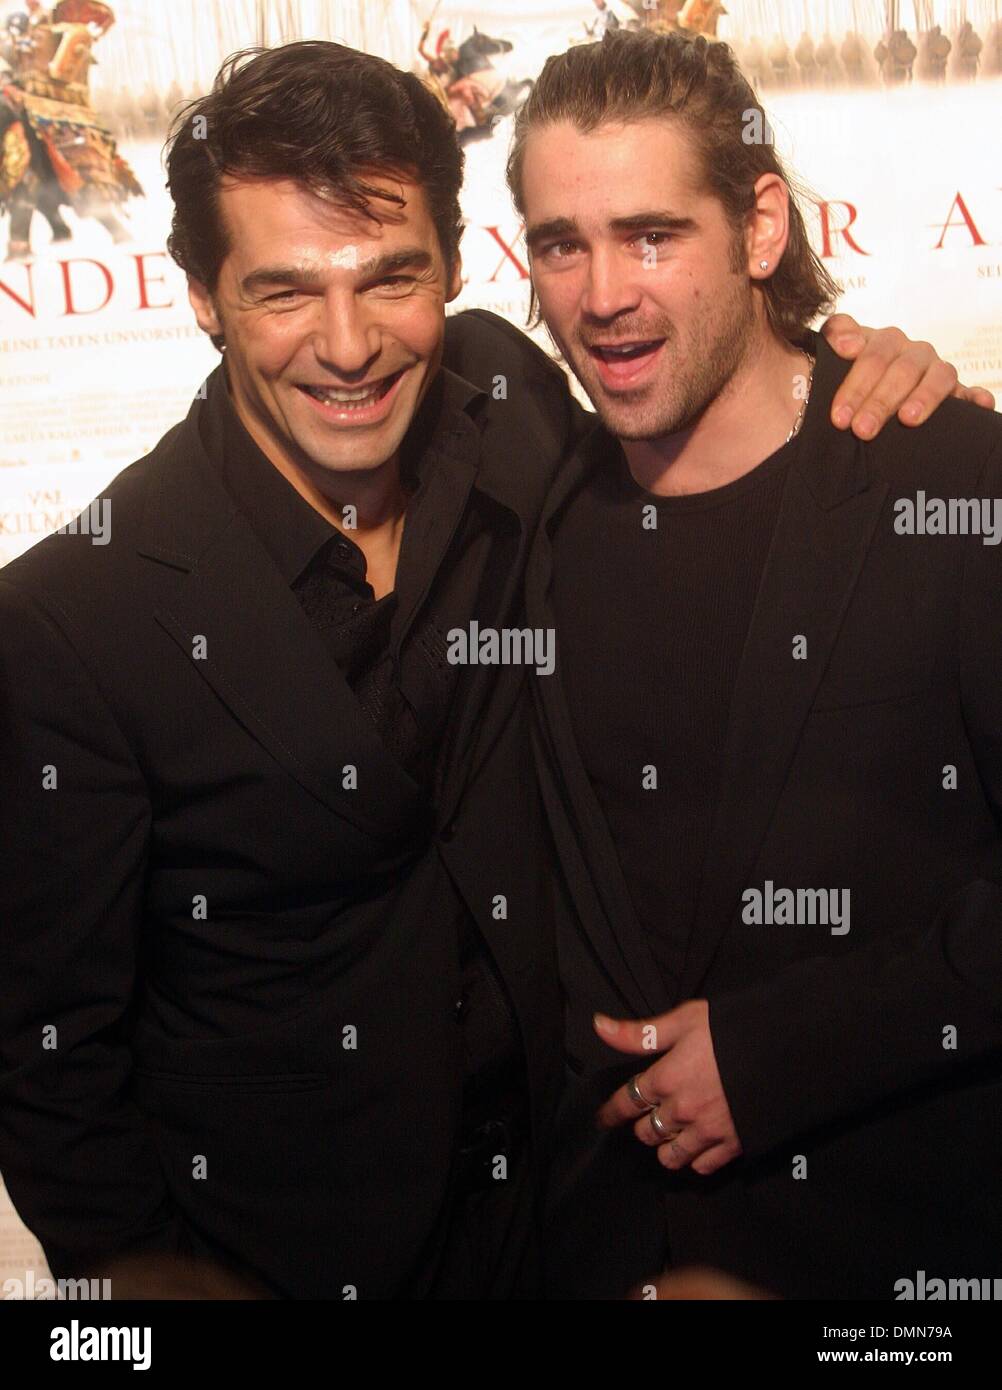 Colin Farrell (r) and Erol Sander (l) at the German premiere of 'Alexander' in Cologne. Stock Photo